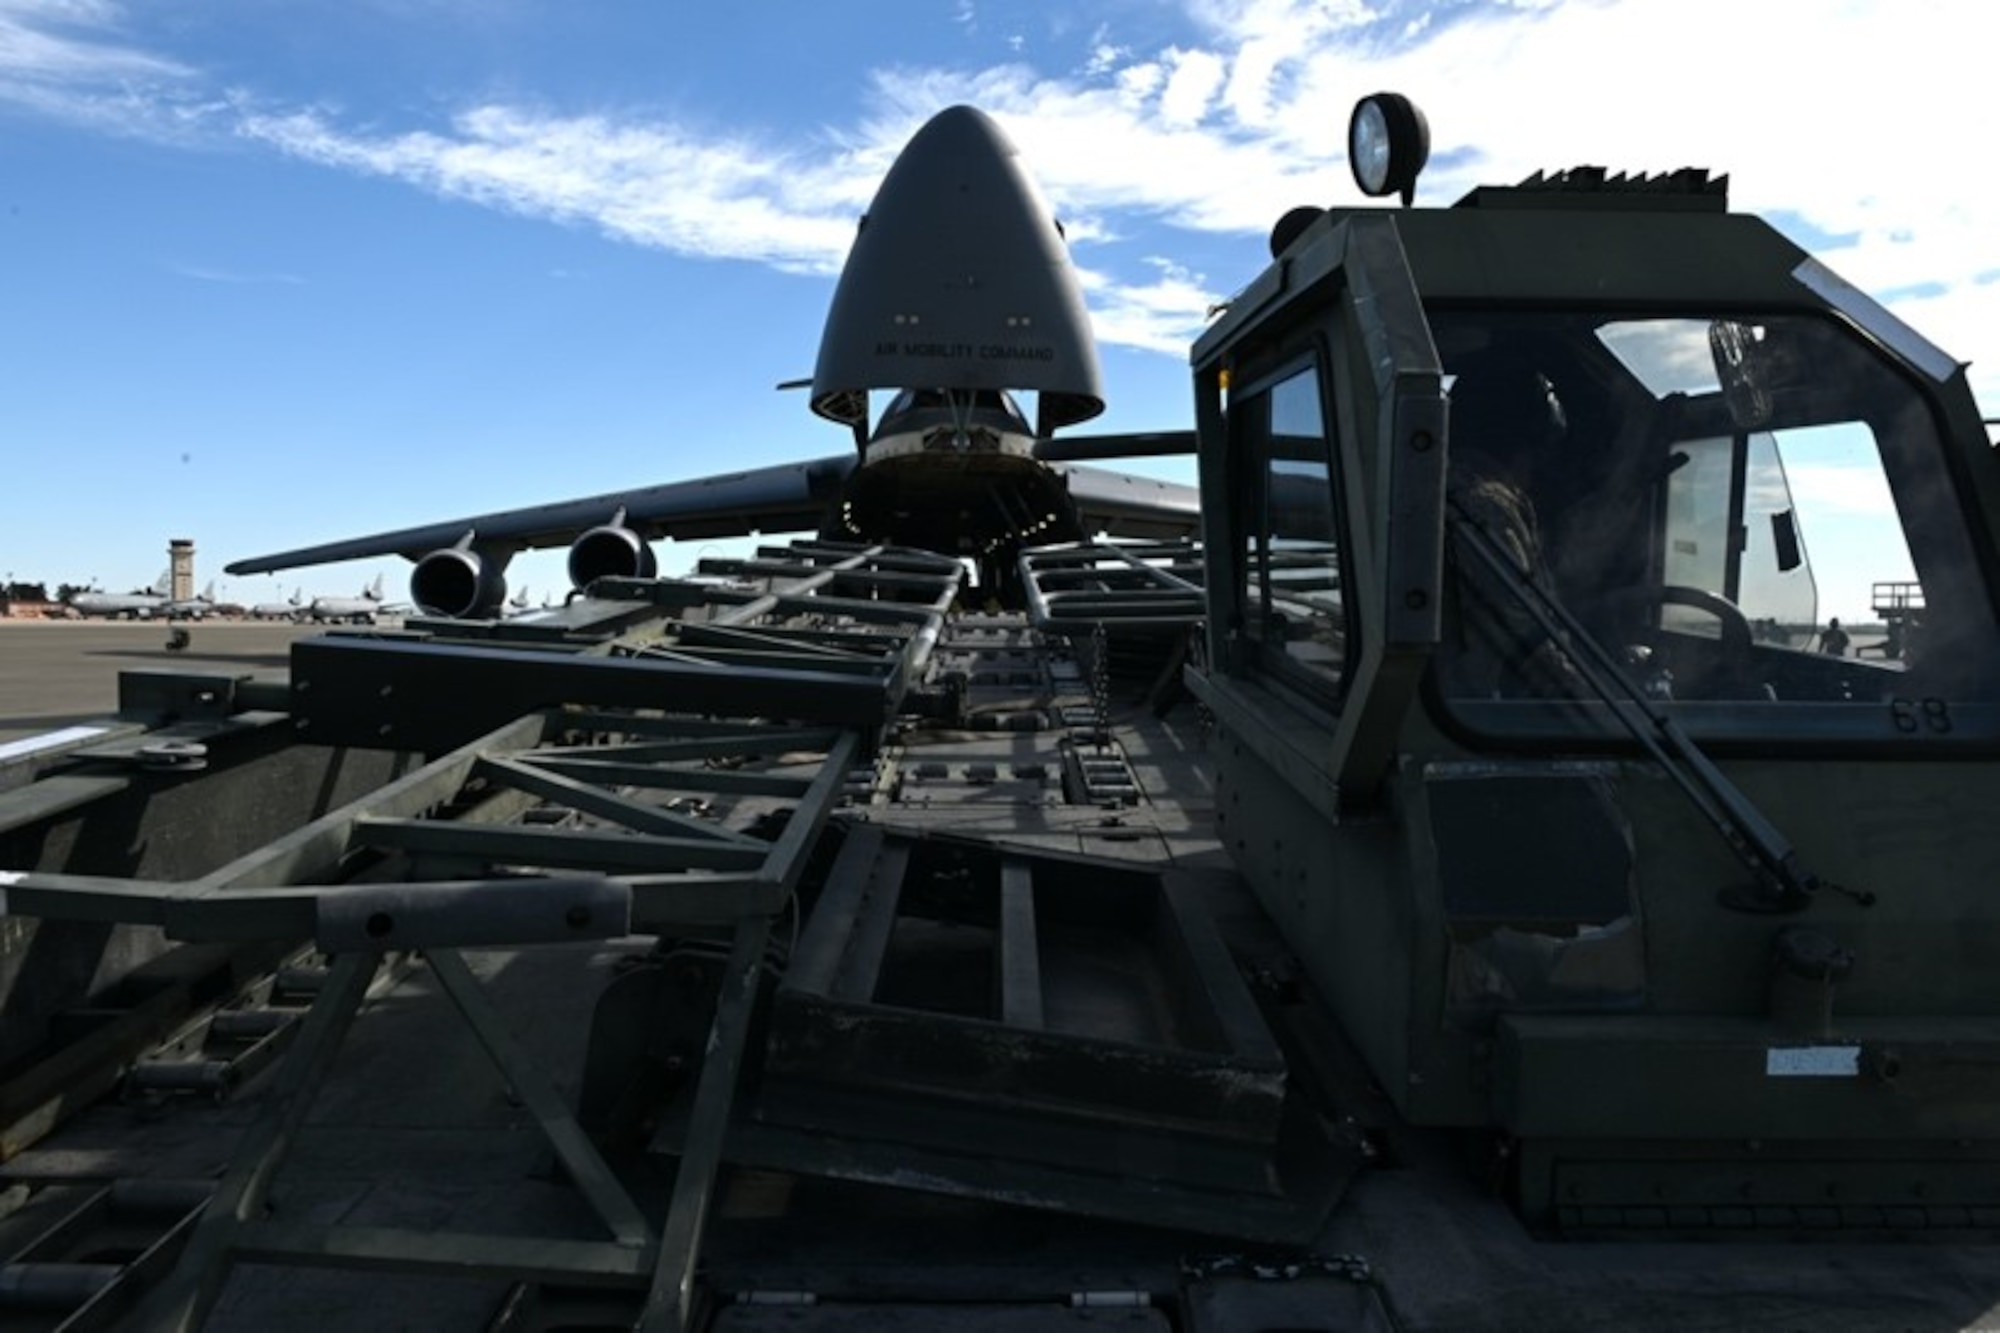 A K loader is positioned in front of the gaping maw of a C-5M Super Galaxy